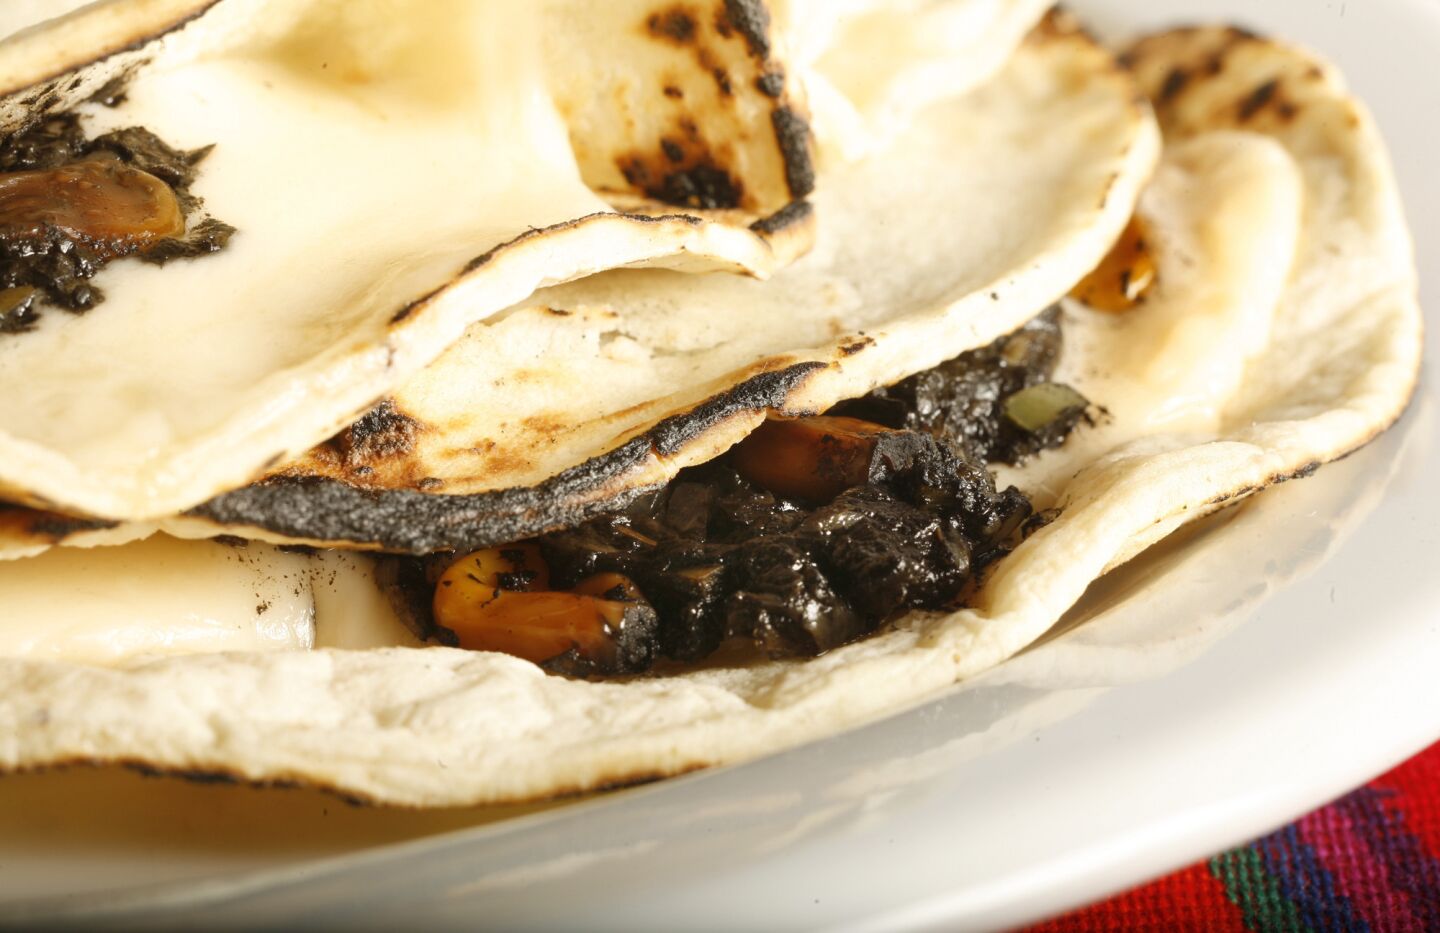 Huitlacoche lends a definite earthy richness to the quesadillas, and a robustness similar to truffles to the finished dish. Recipe: Huitlacoche quesadillas